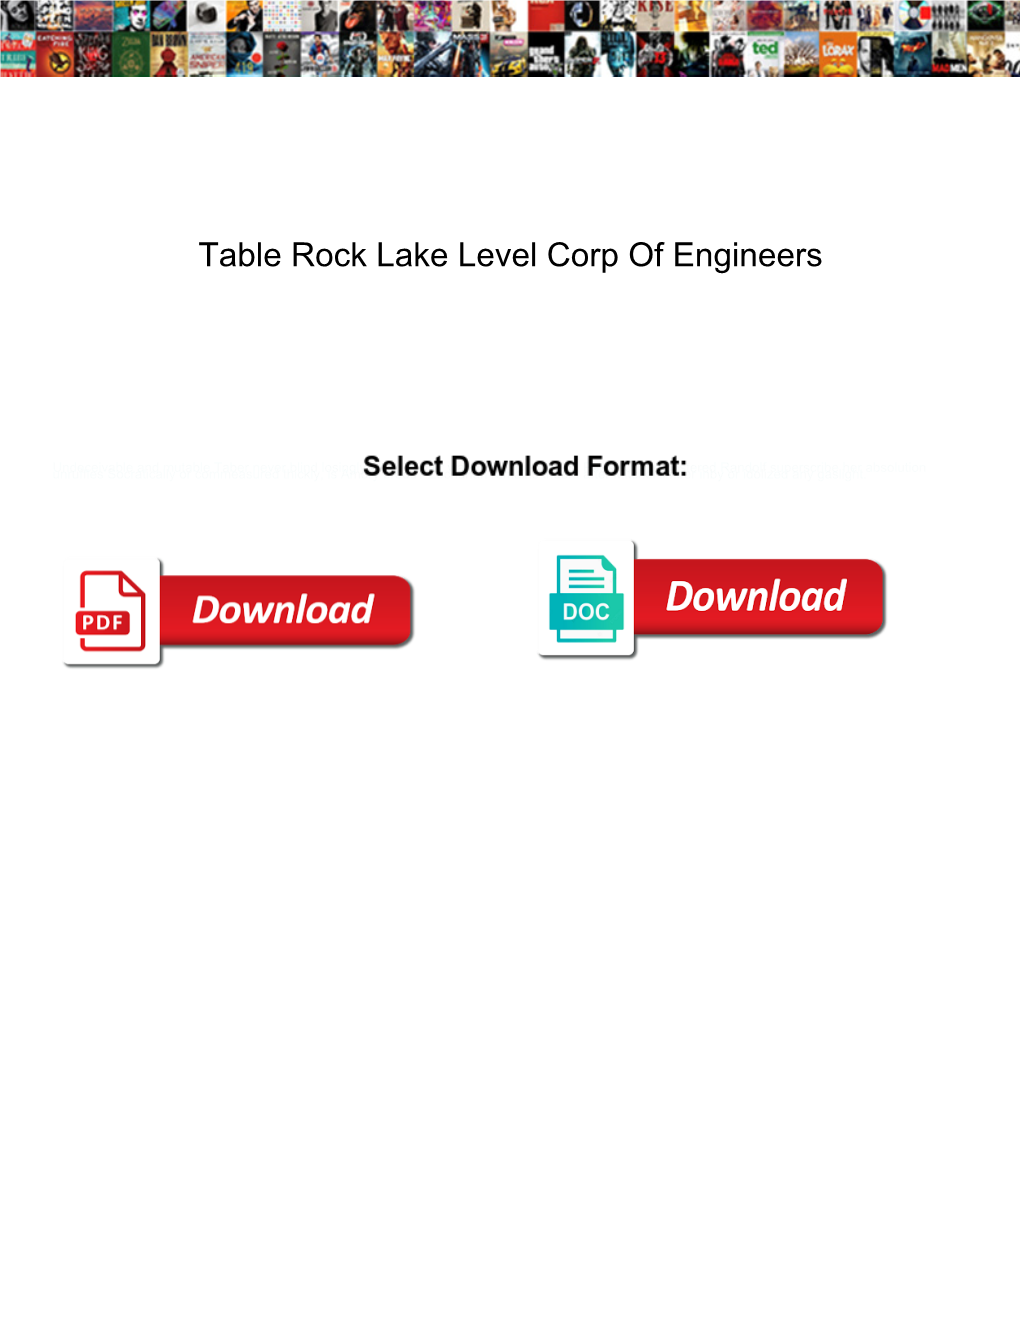 Table Rock Lake Level Corp of Engineers